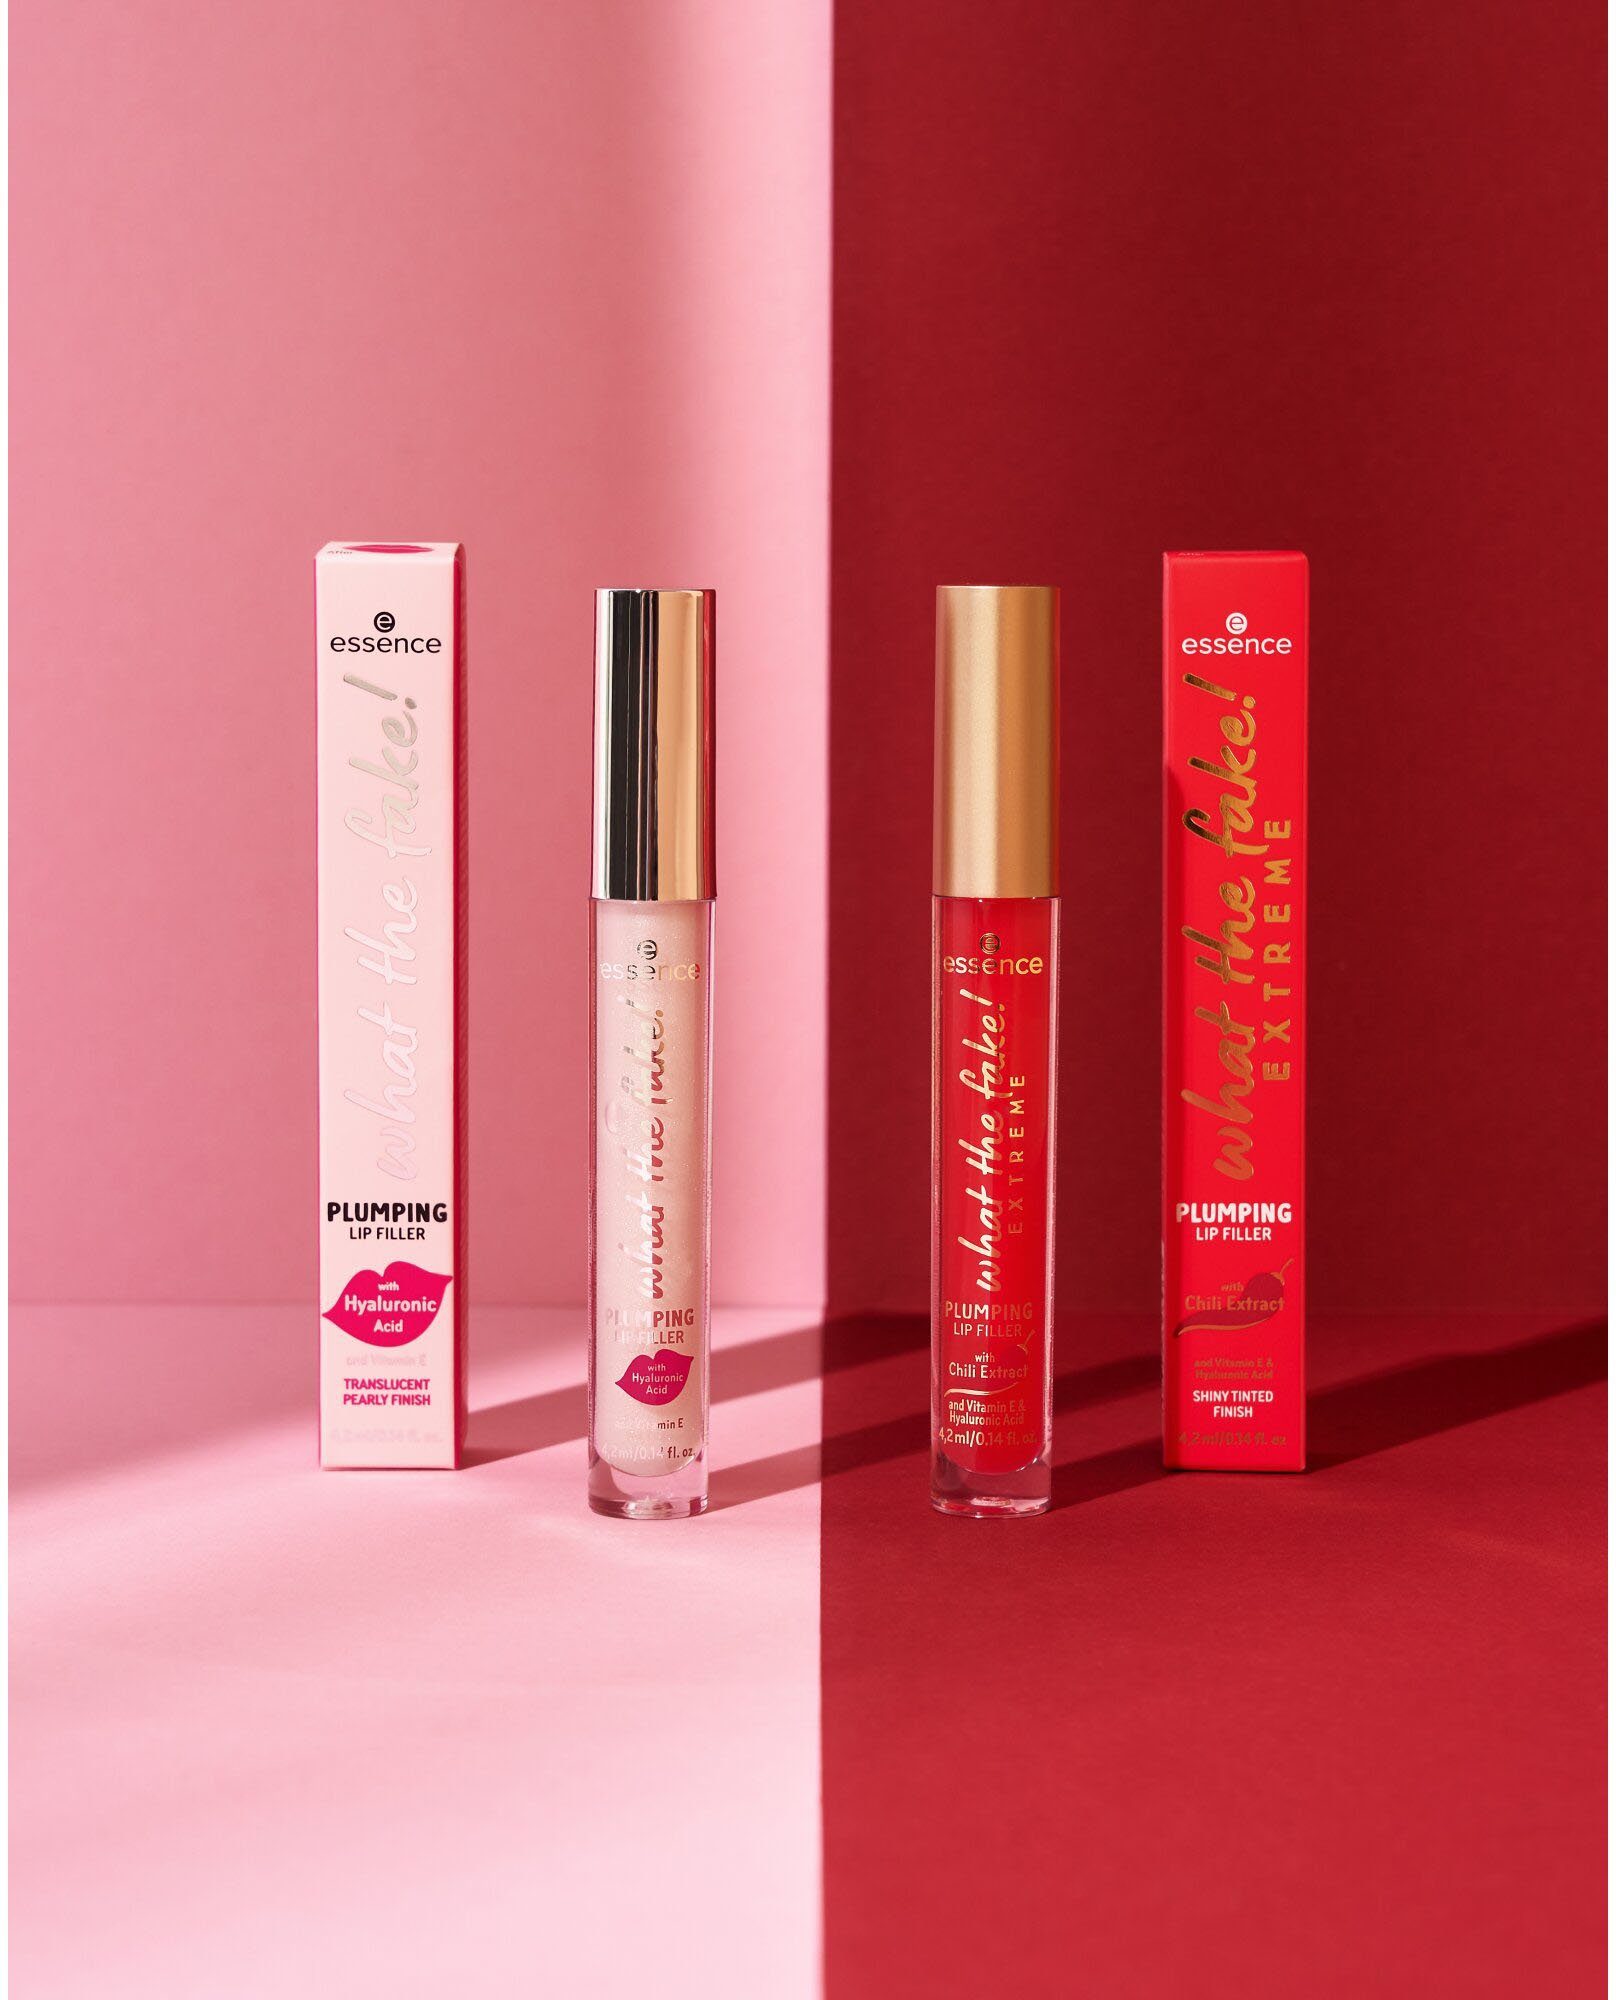 3-tlg. PLUMPING what LIP fake! EXTREME the FILLER, Lip-Booster Essence